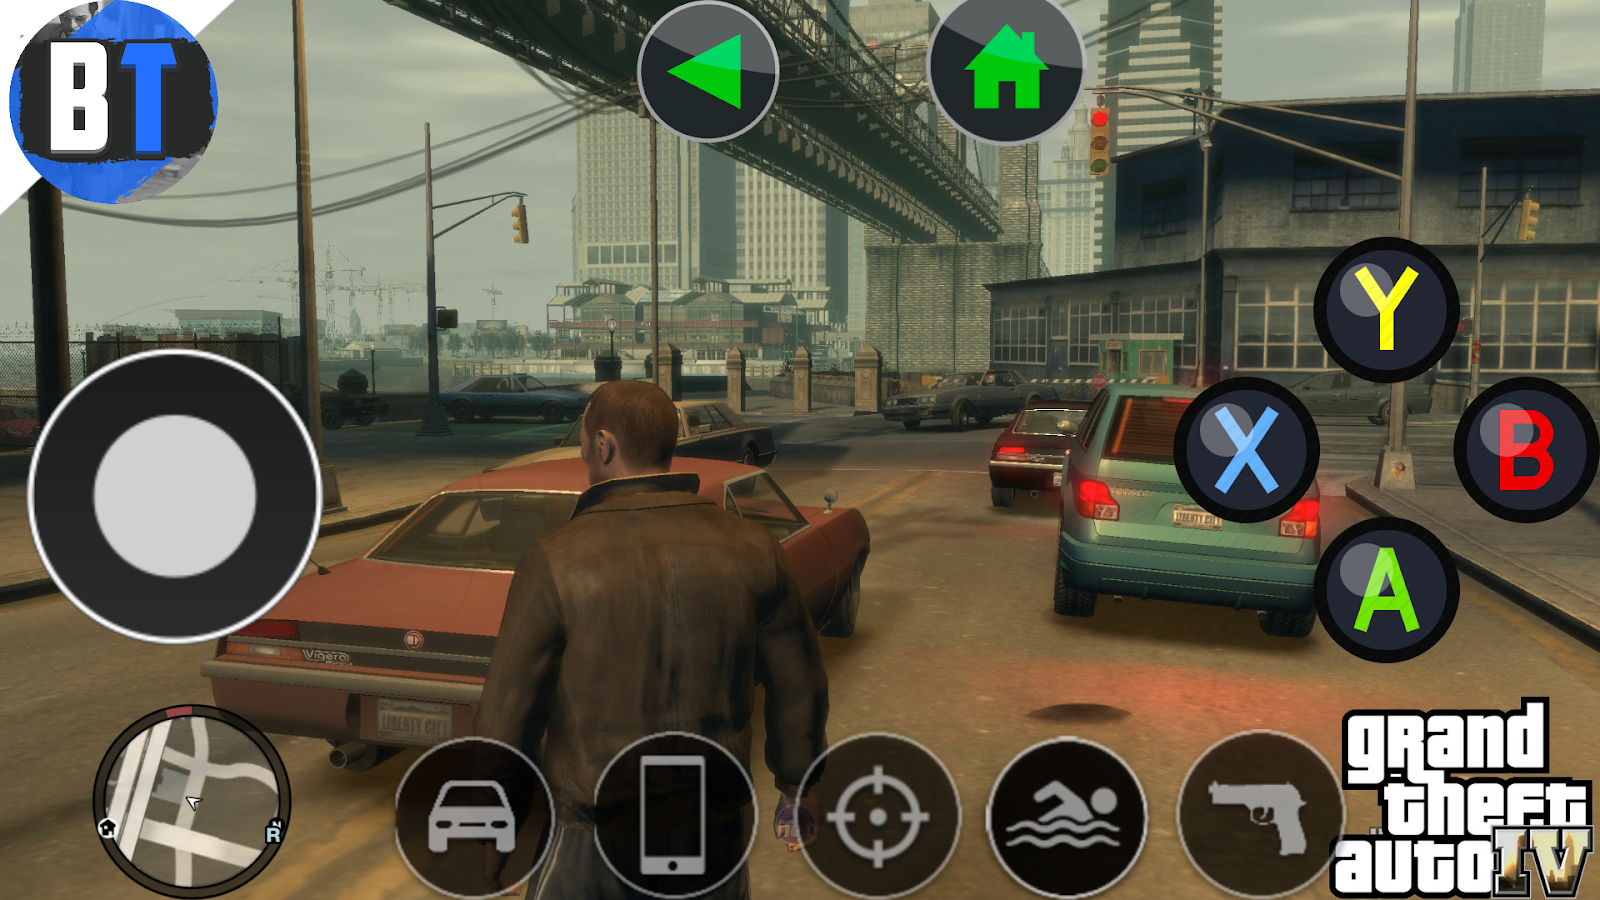 Gta 5 for android full version фото 82